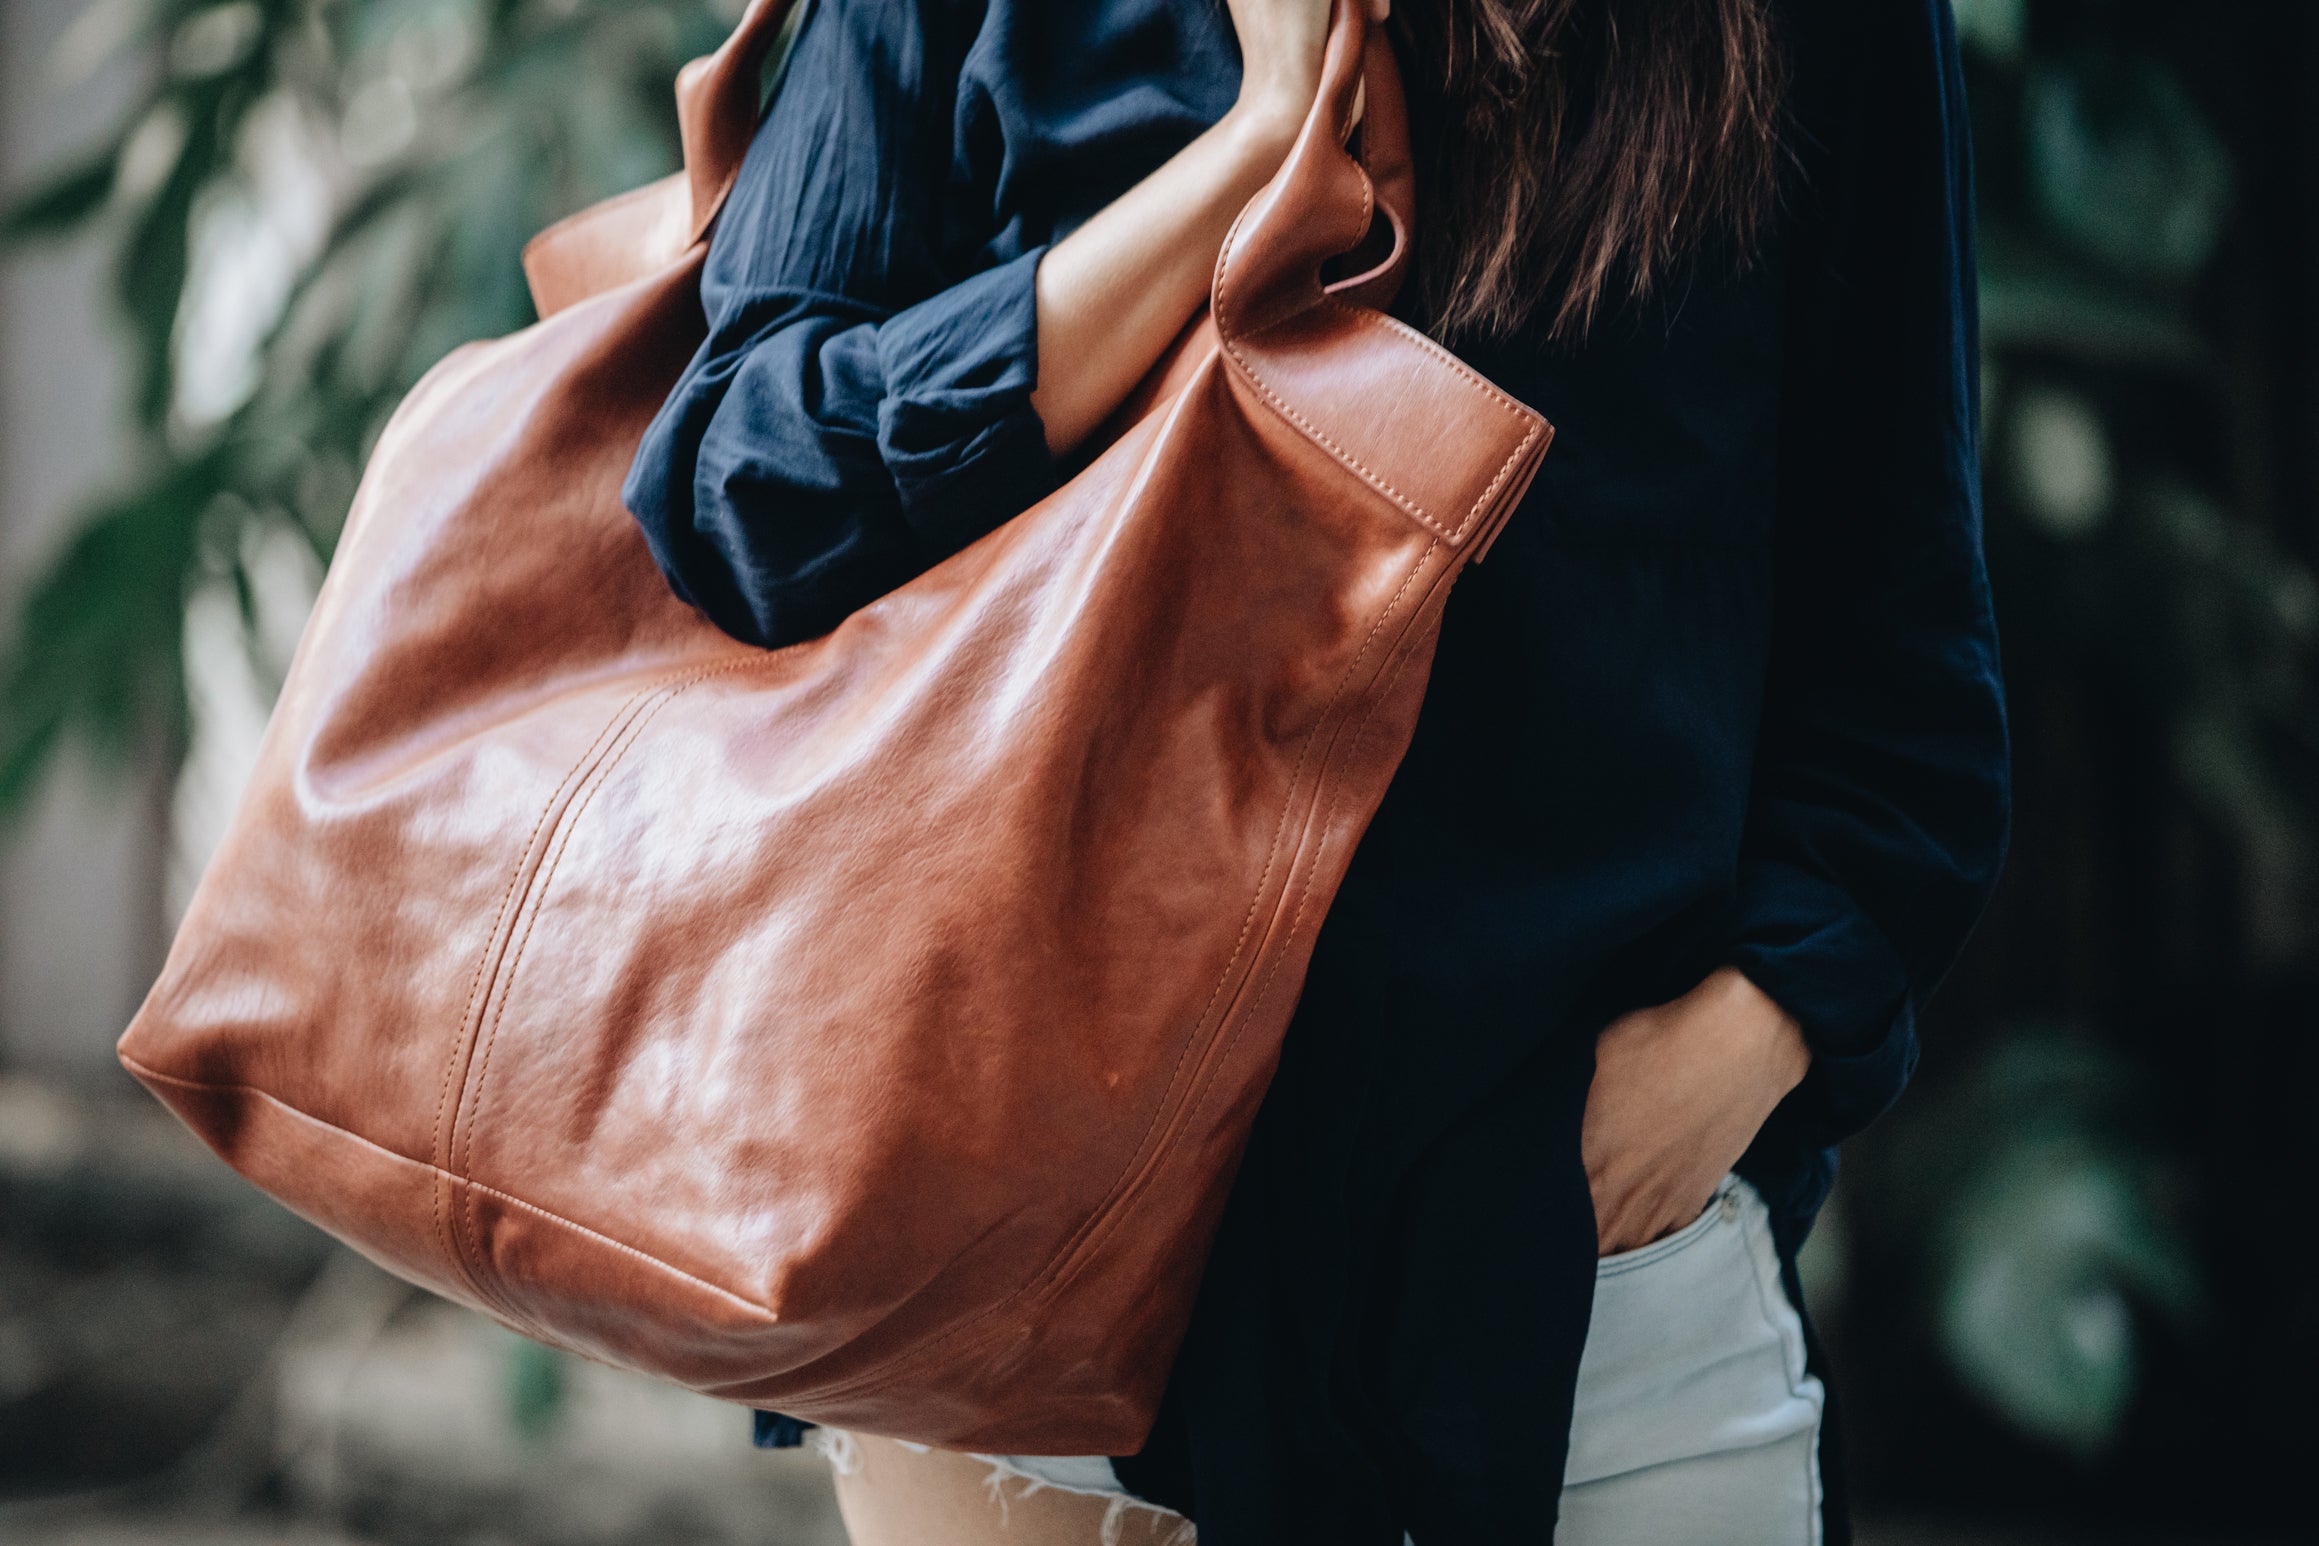 Shop Leather Tote Bags For Women Online